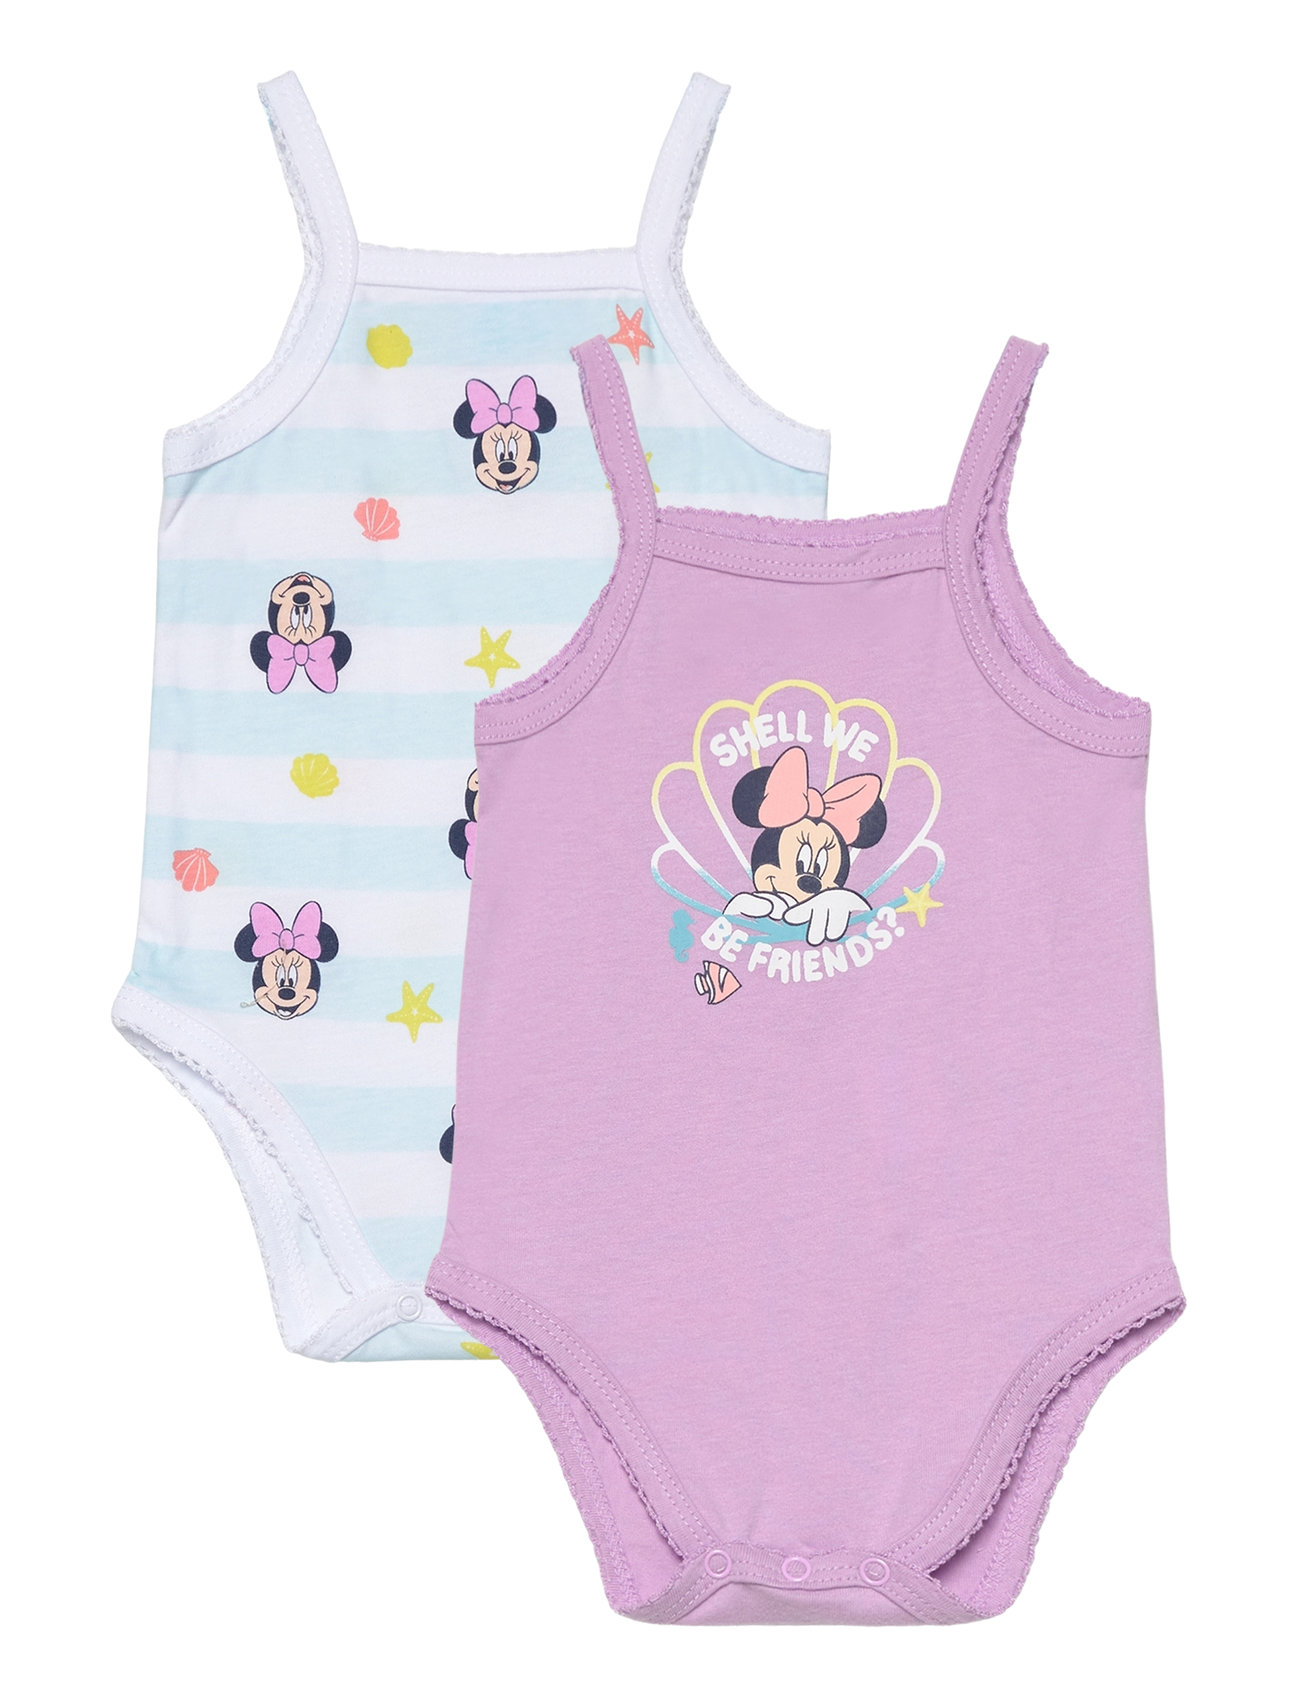 Body Bodies Sleeveless Bodies Multi/patterned Minnie Mouse